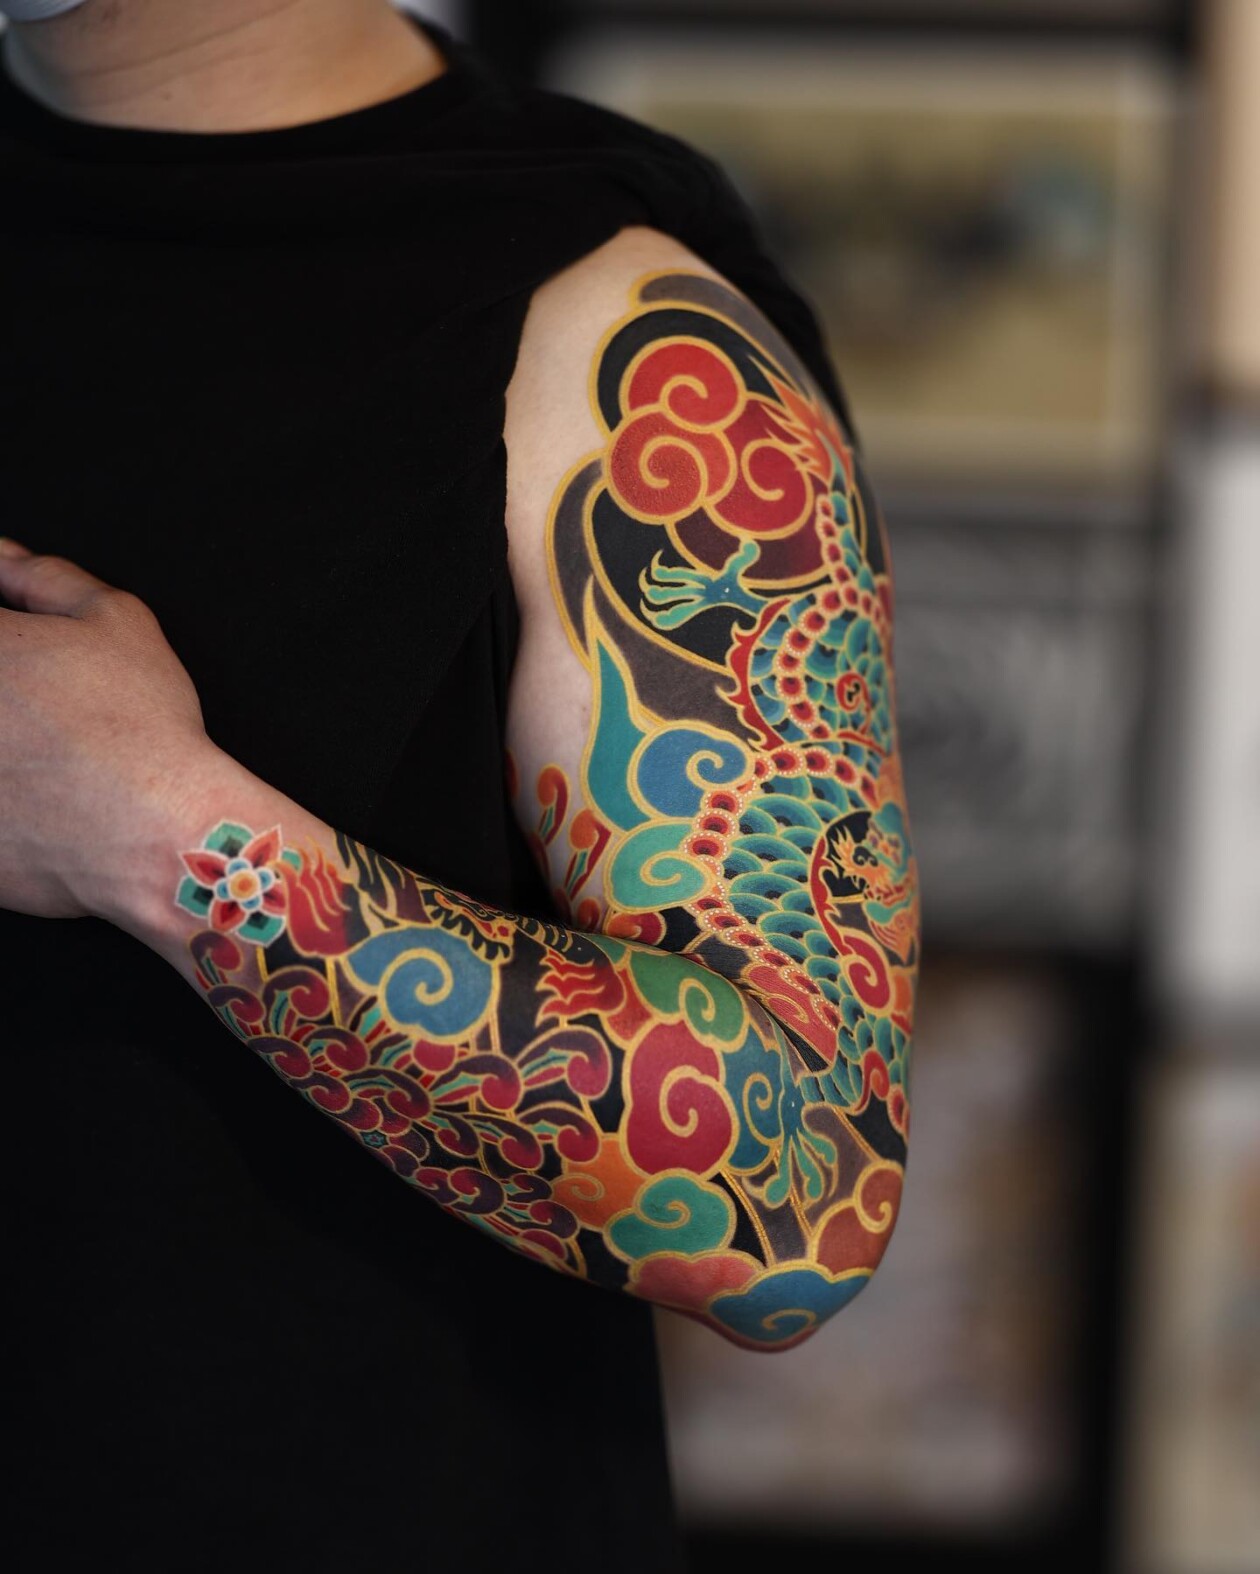 Vibrant Tattoos With Densely Layered Patterns By Korean Artist Pittakkm (4)